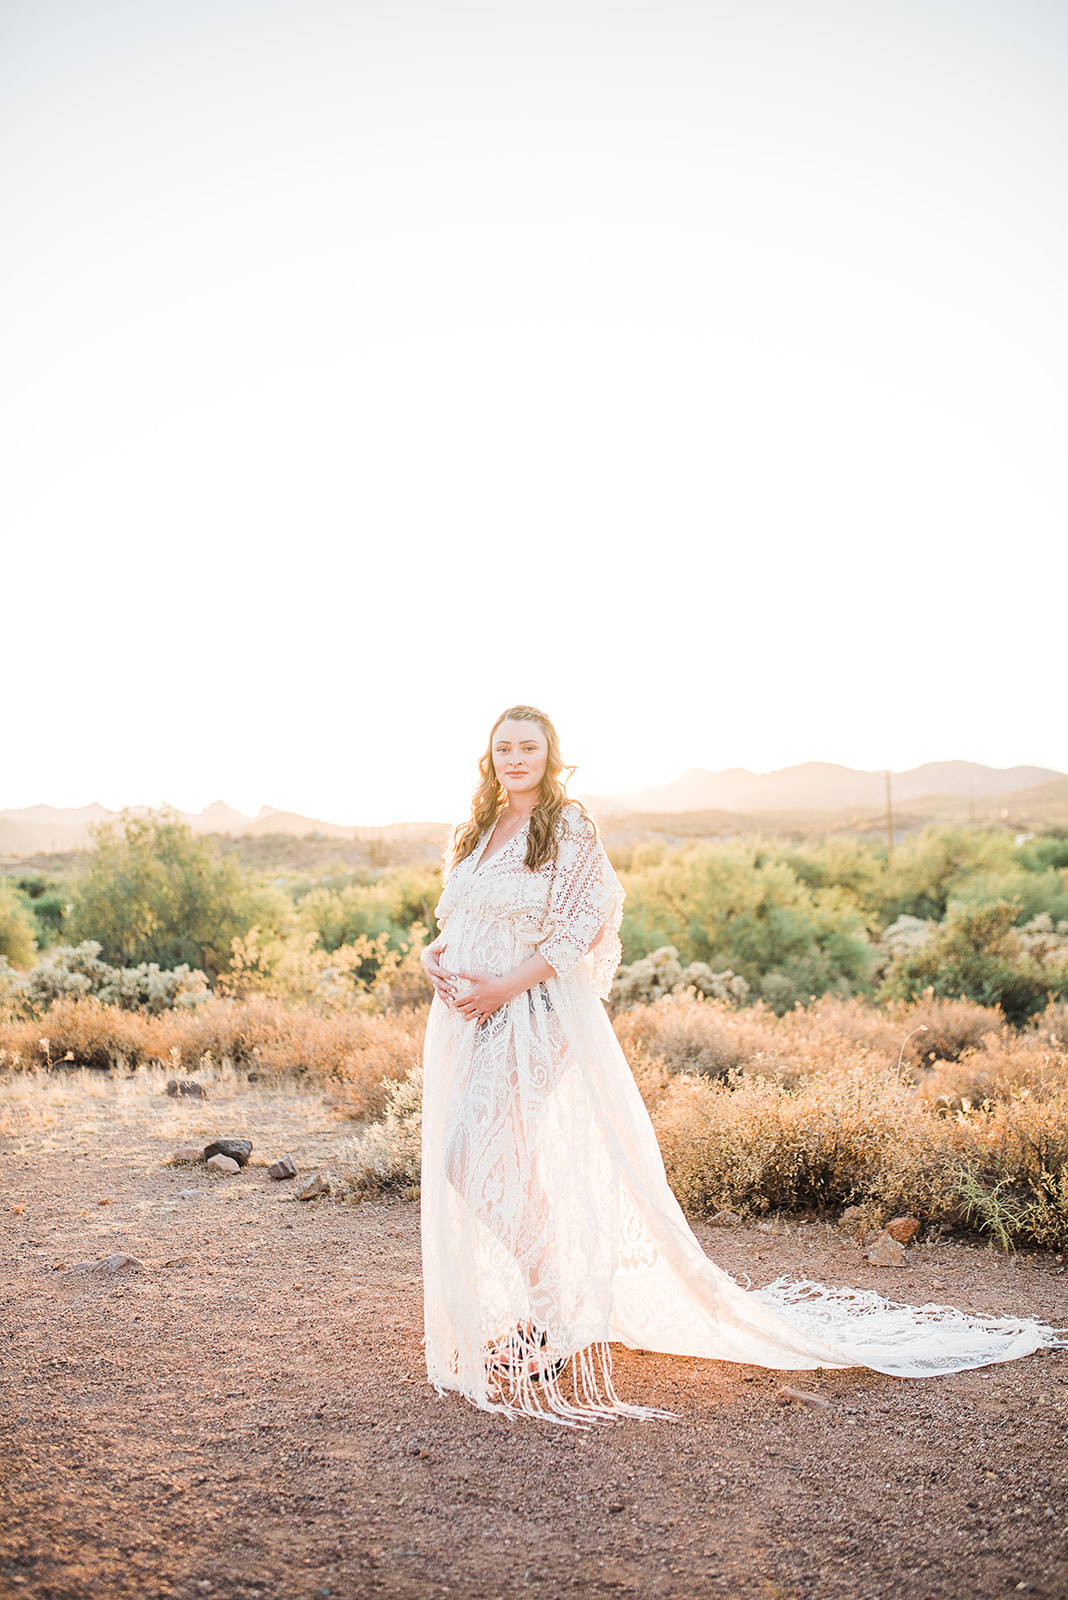 A mother to be holds her bump while standing in a white lace maternity gown in a desert path